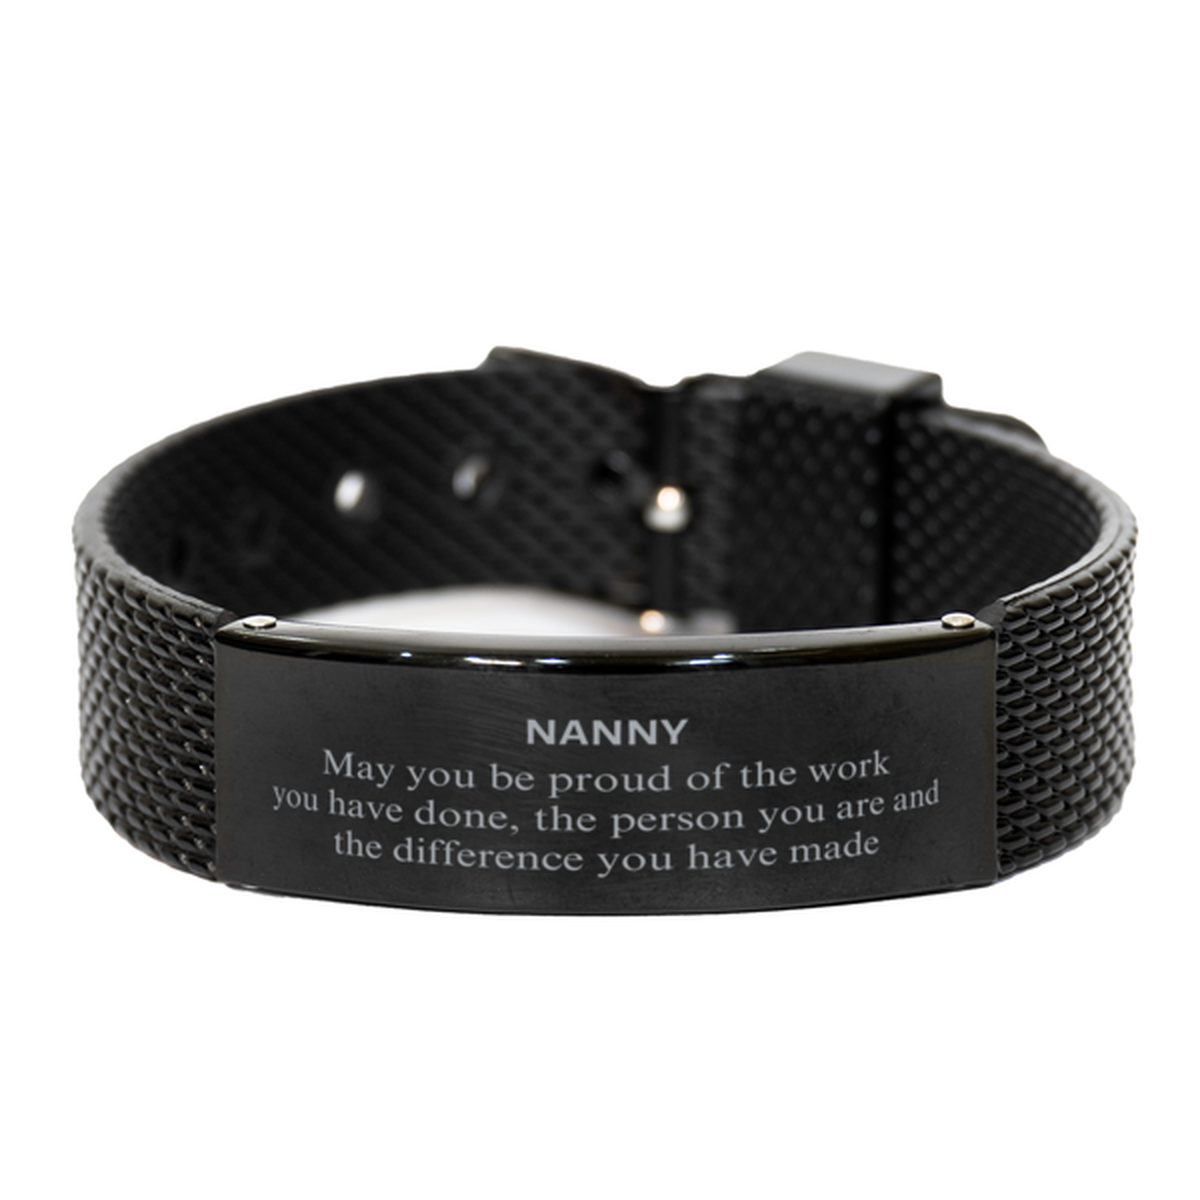 Nanny May you be proud of the work you have done, Retirement Nanny Black Shark Mesh Bracelet for Colleague Appreciation Gifts Amazing for Nanny